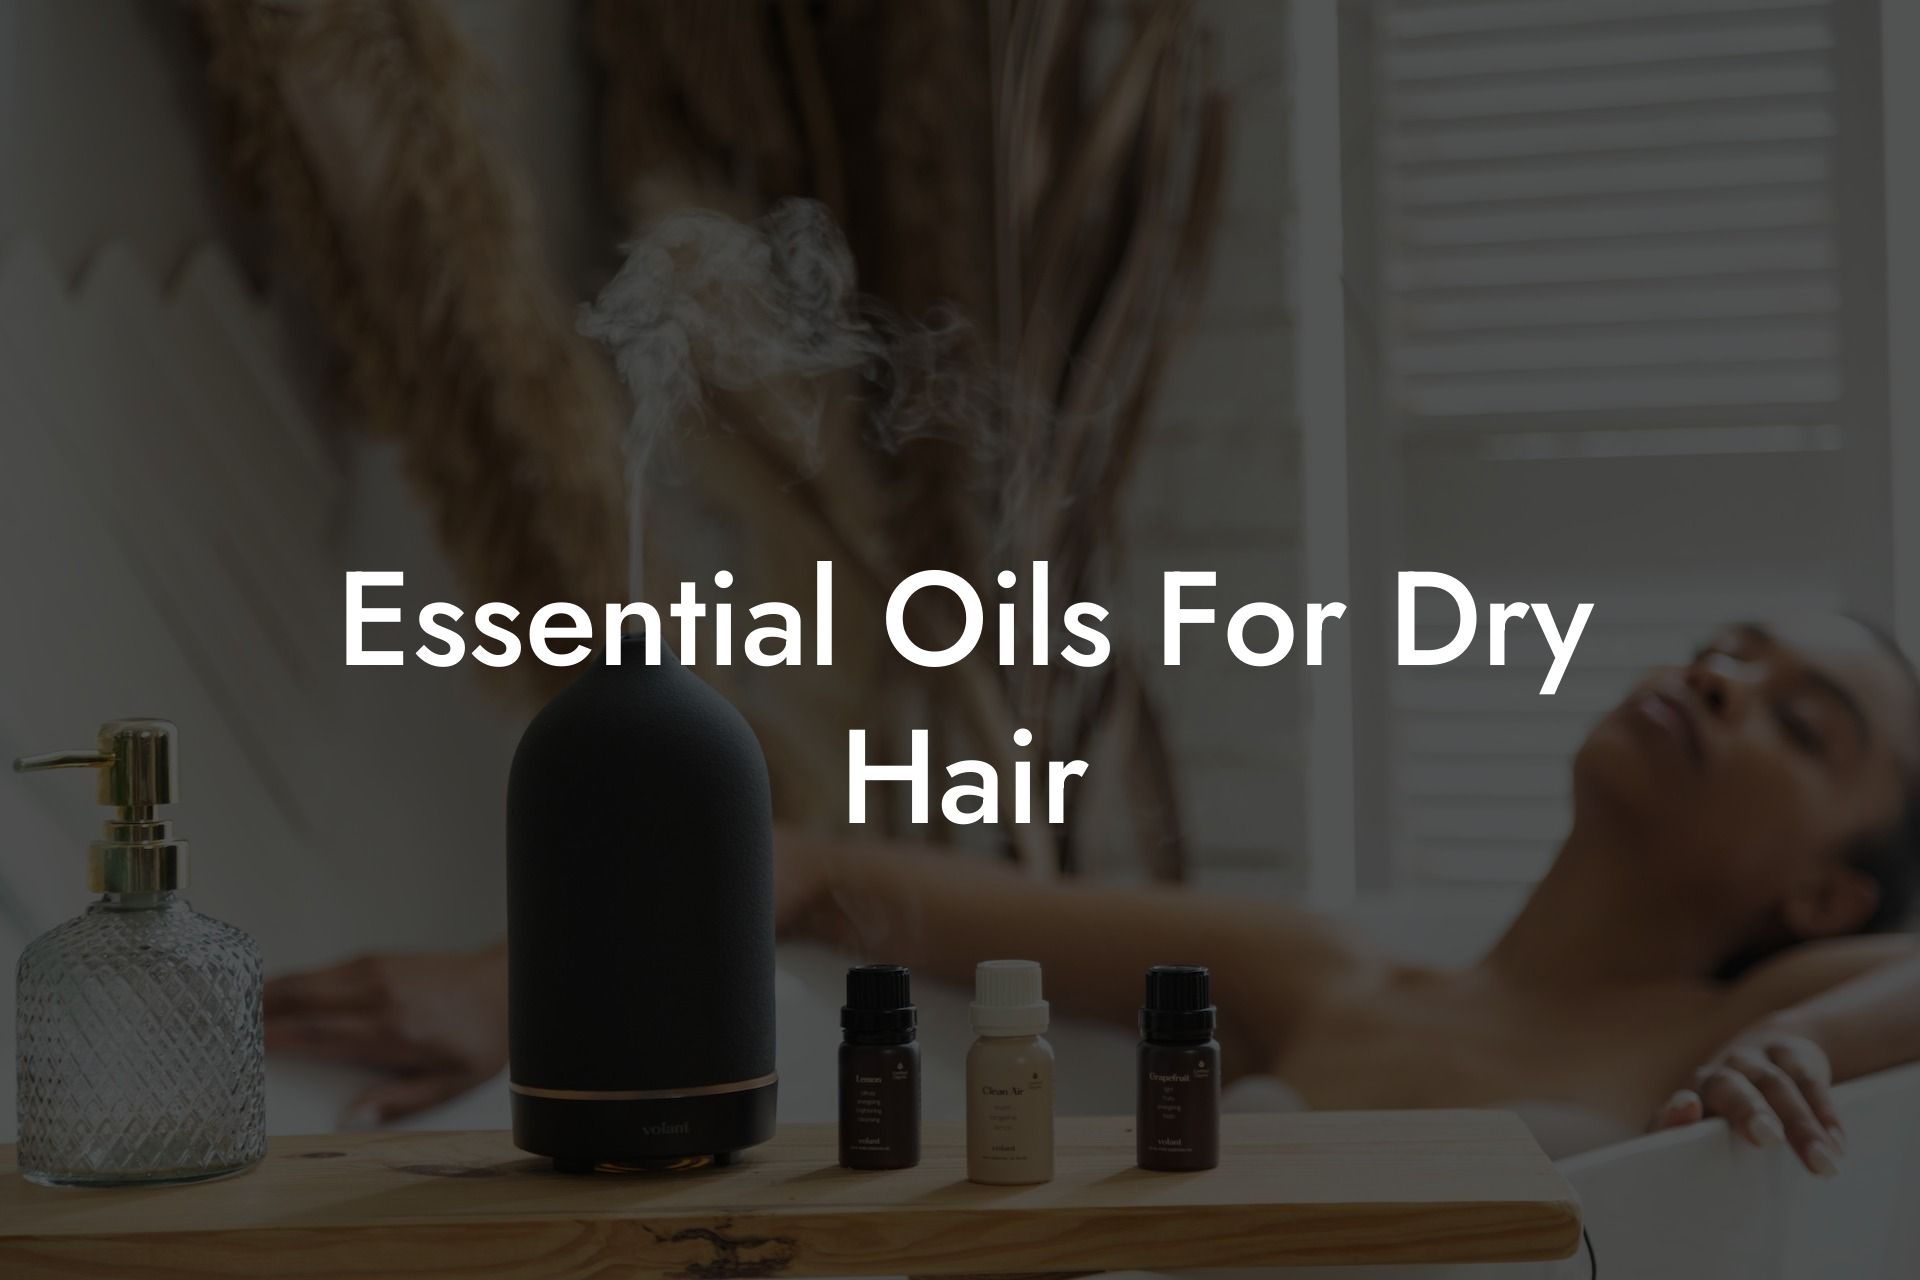 Essential Oils For Dry Hair